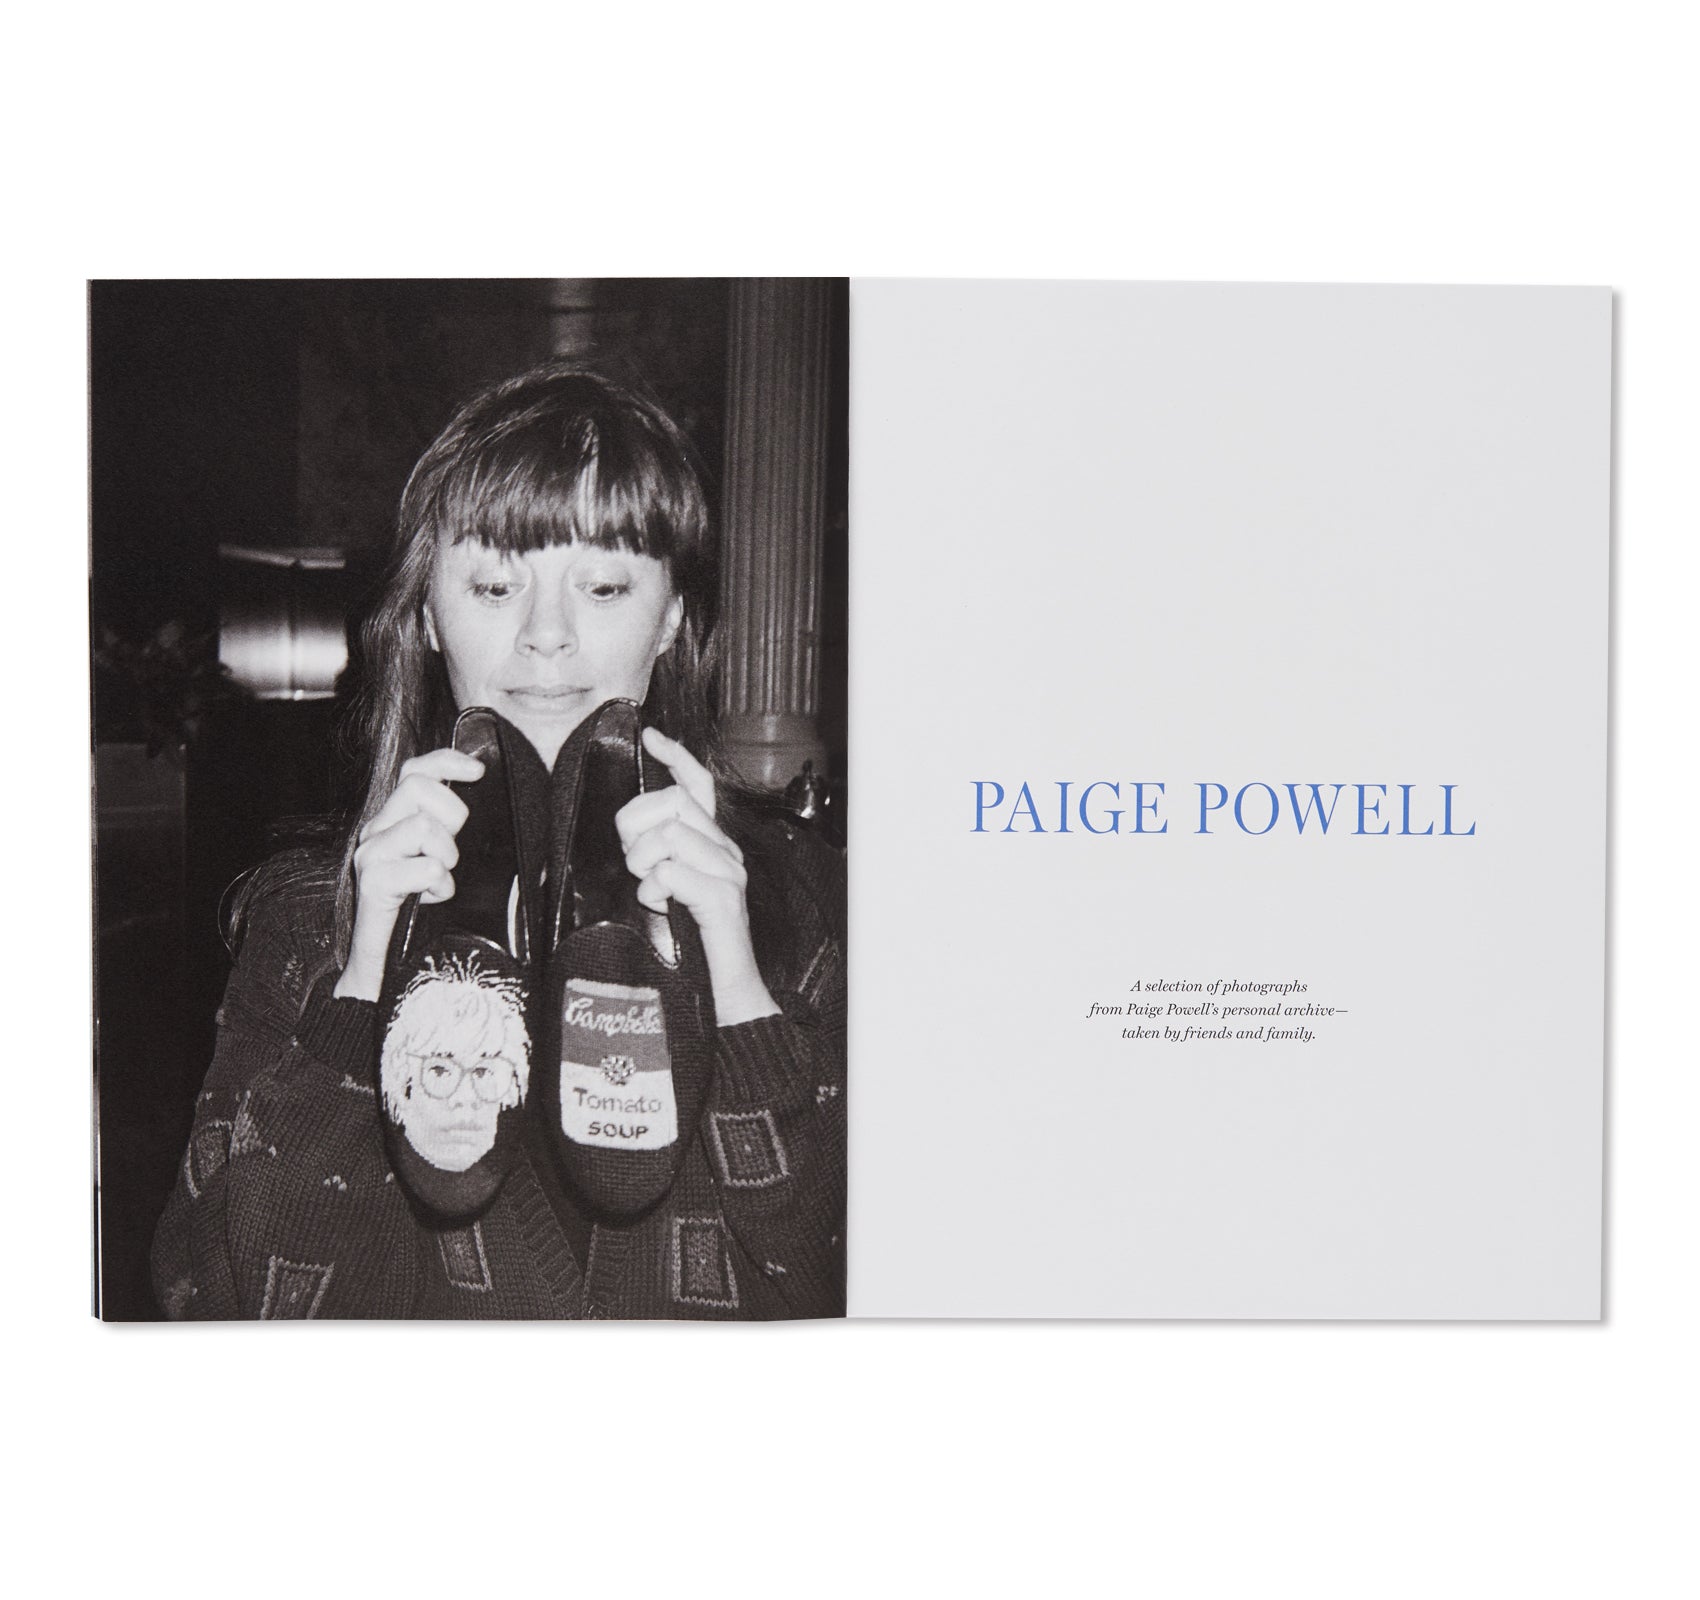 PAIGE POWELL by Paige Powell